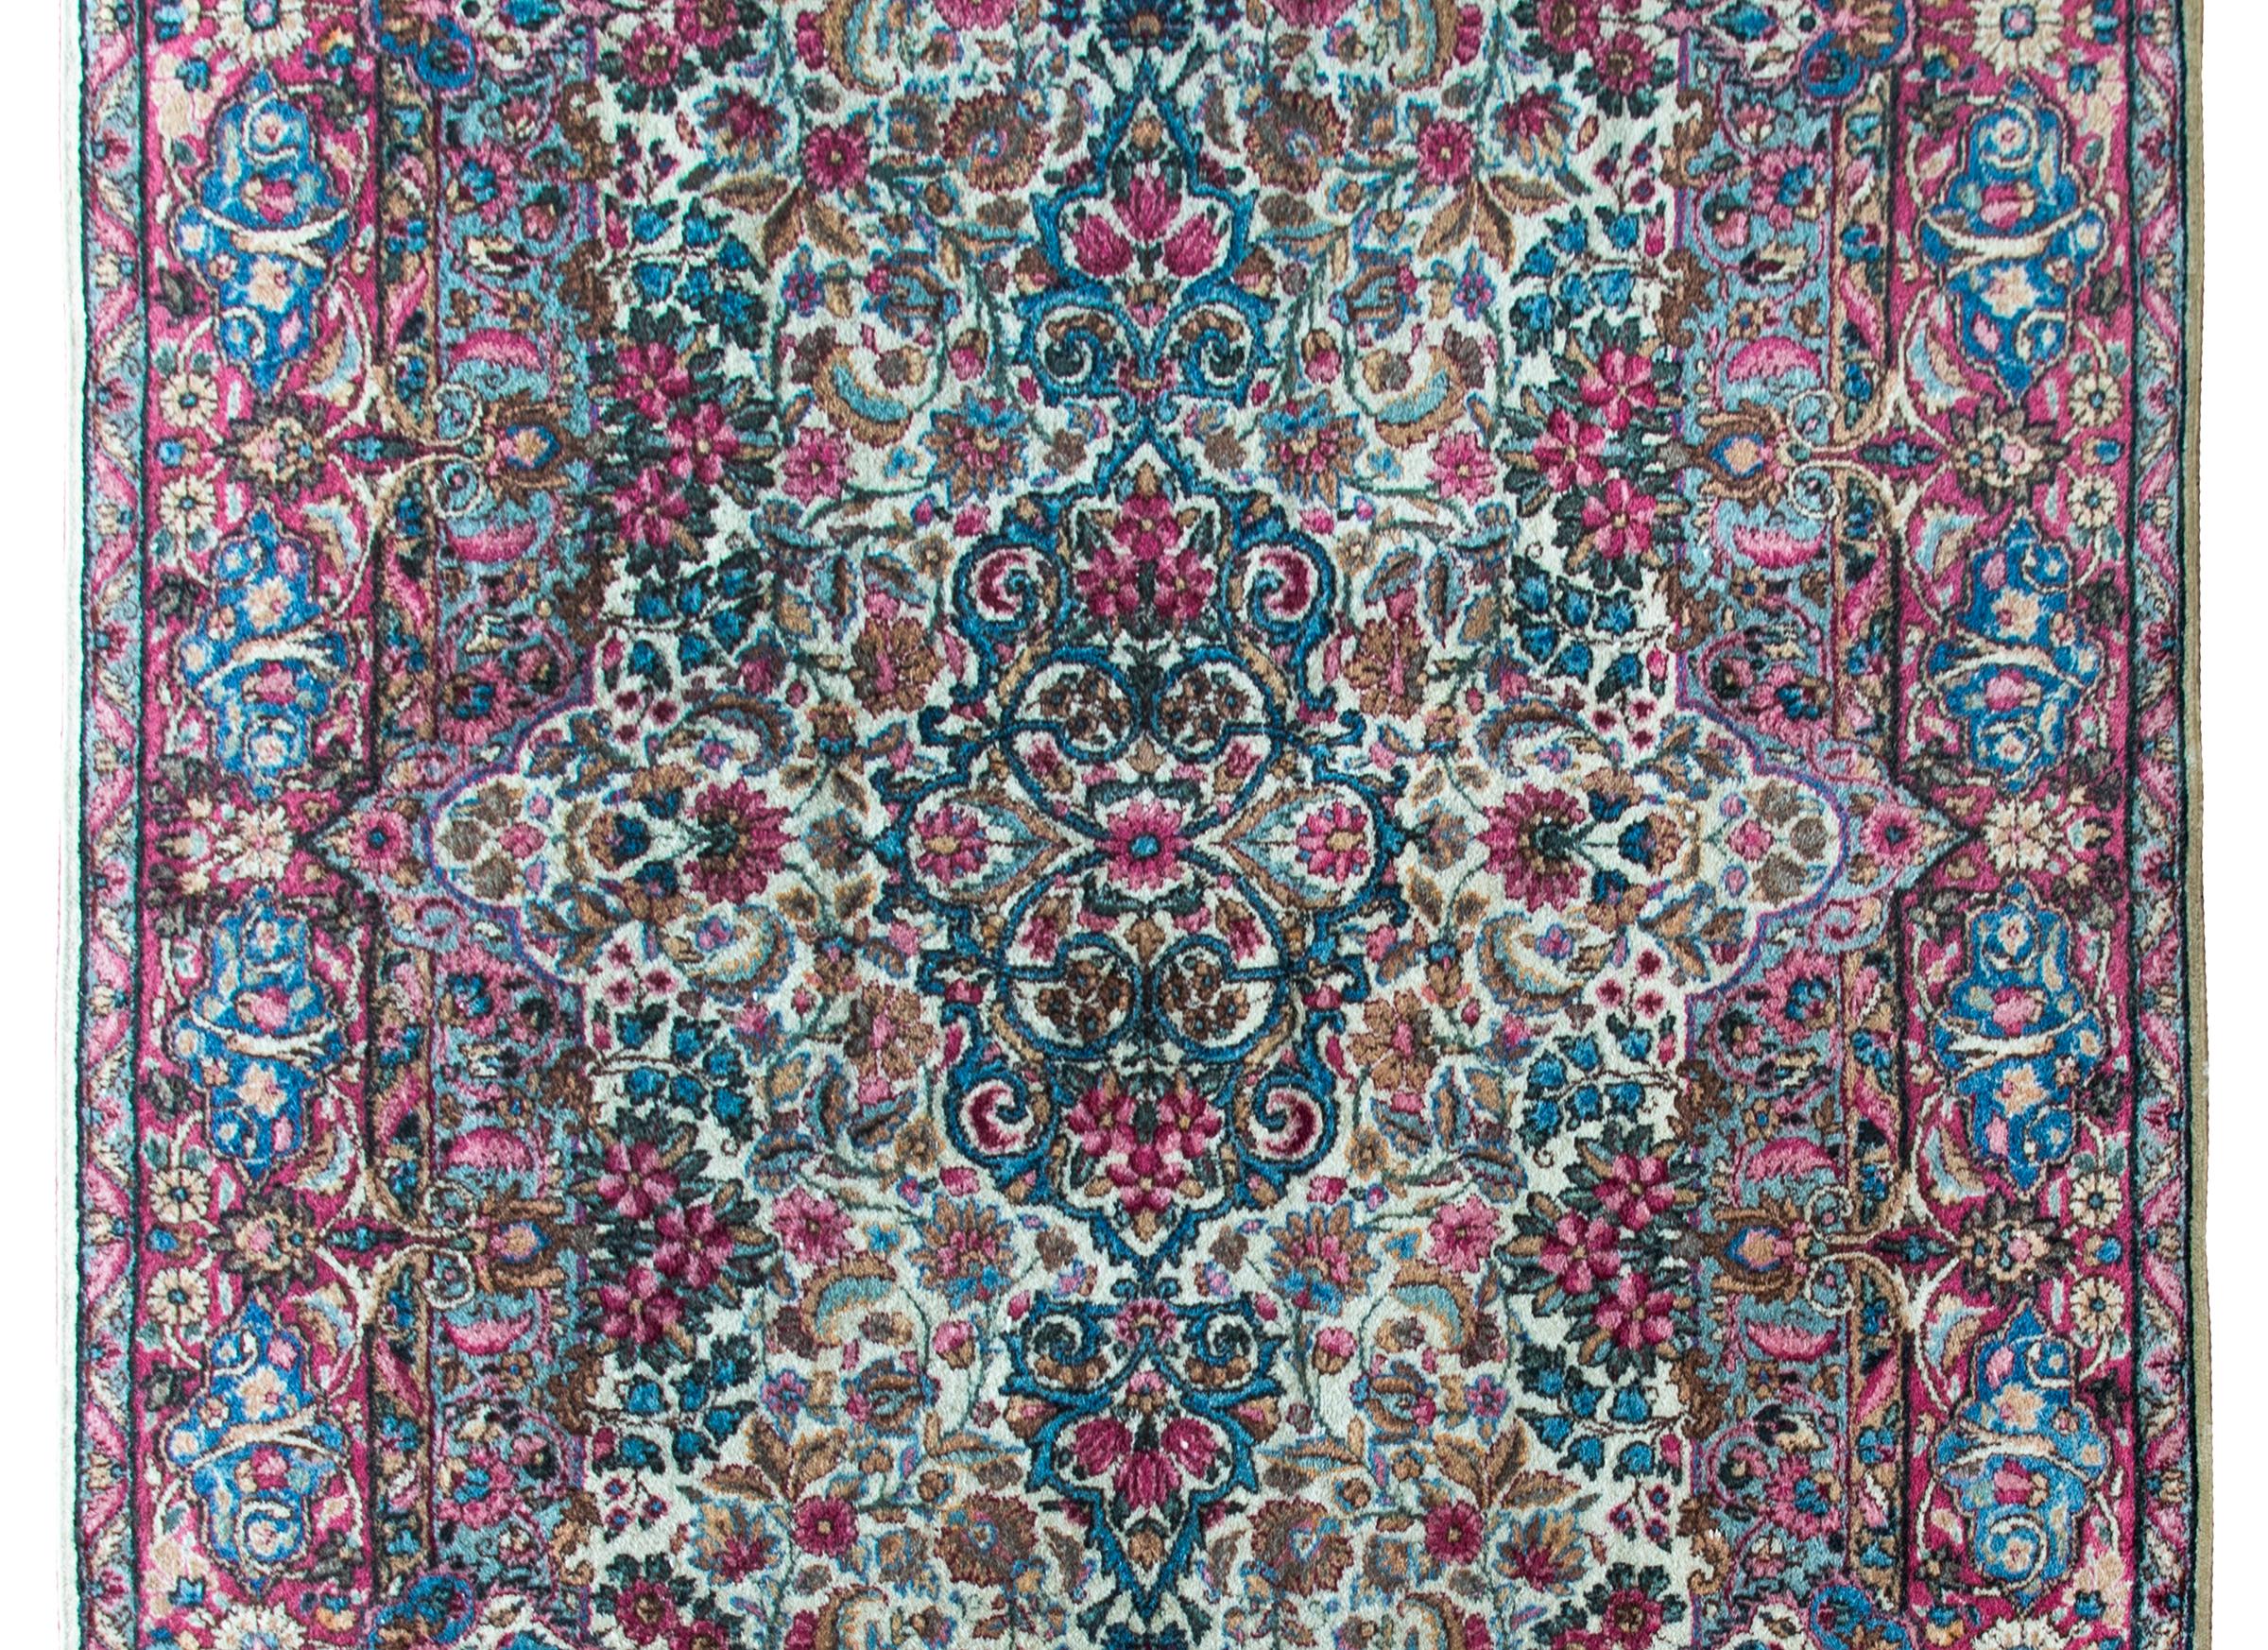 A beautiful early 20th century Persian Kirman rug with an all-over mirrored densely woven floral pattern with myriad flowers, surrounded by an incredible floral patterned border and all woven in traditional Kirman colors of cream, light and dark